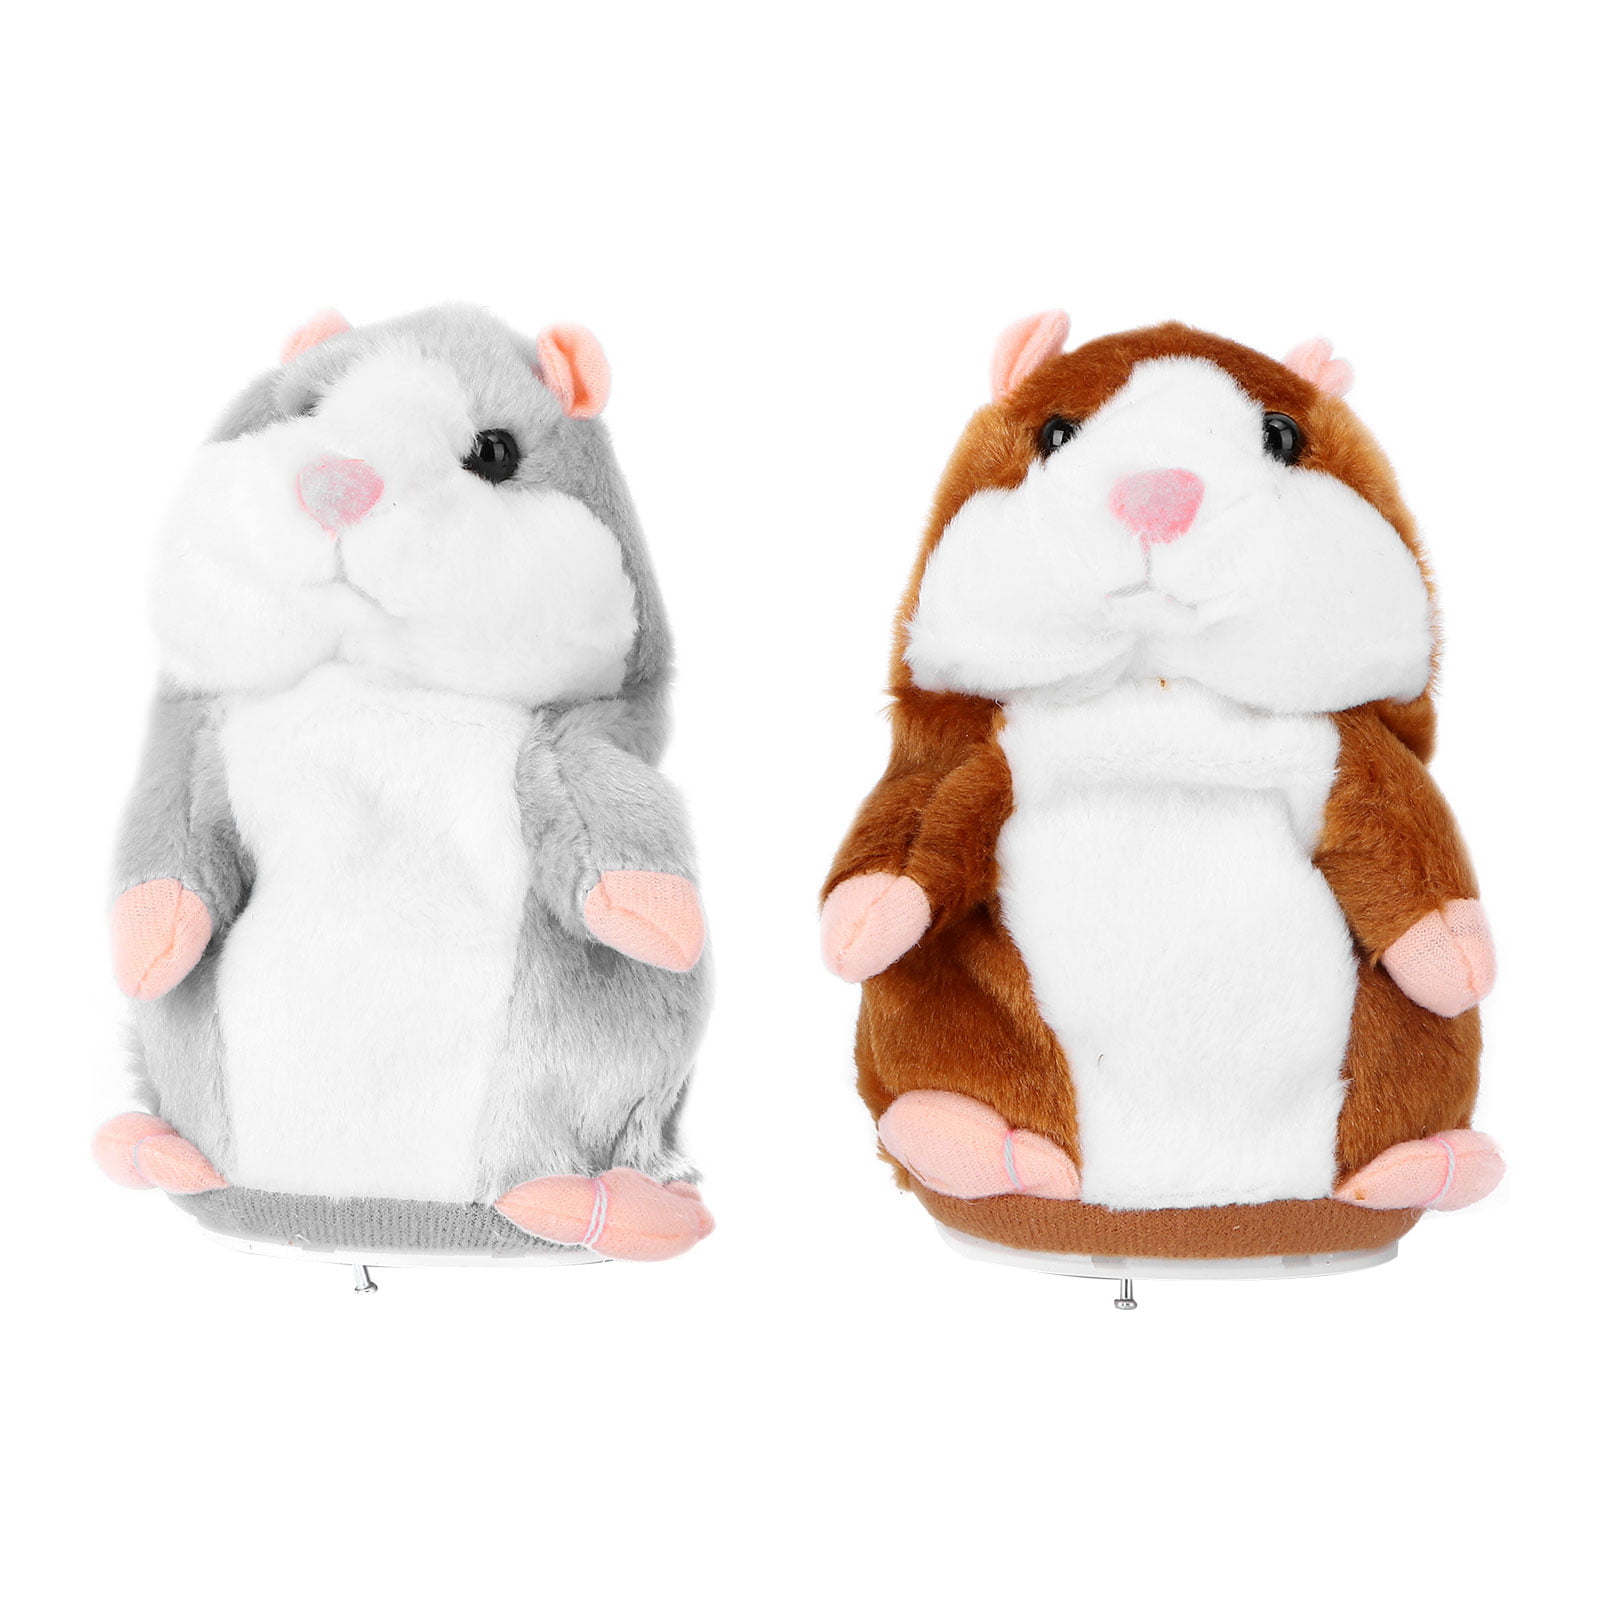 Talking Hamster Repeats What You Say Sound Pet Mouse Sassy Plush Toy Kids Gift 